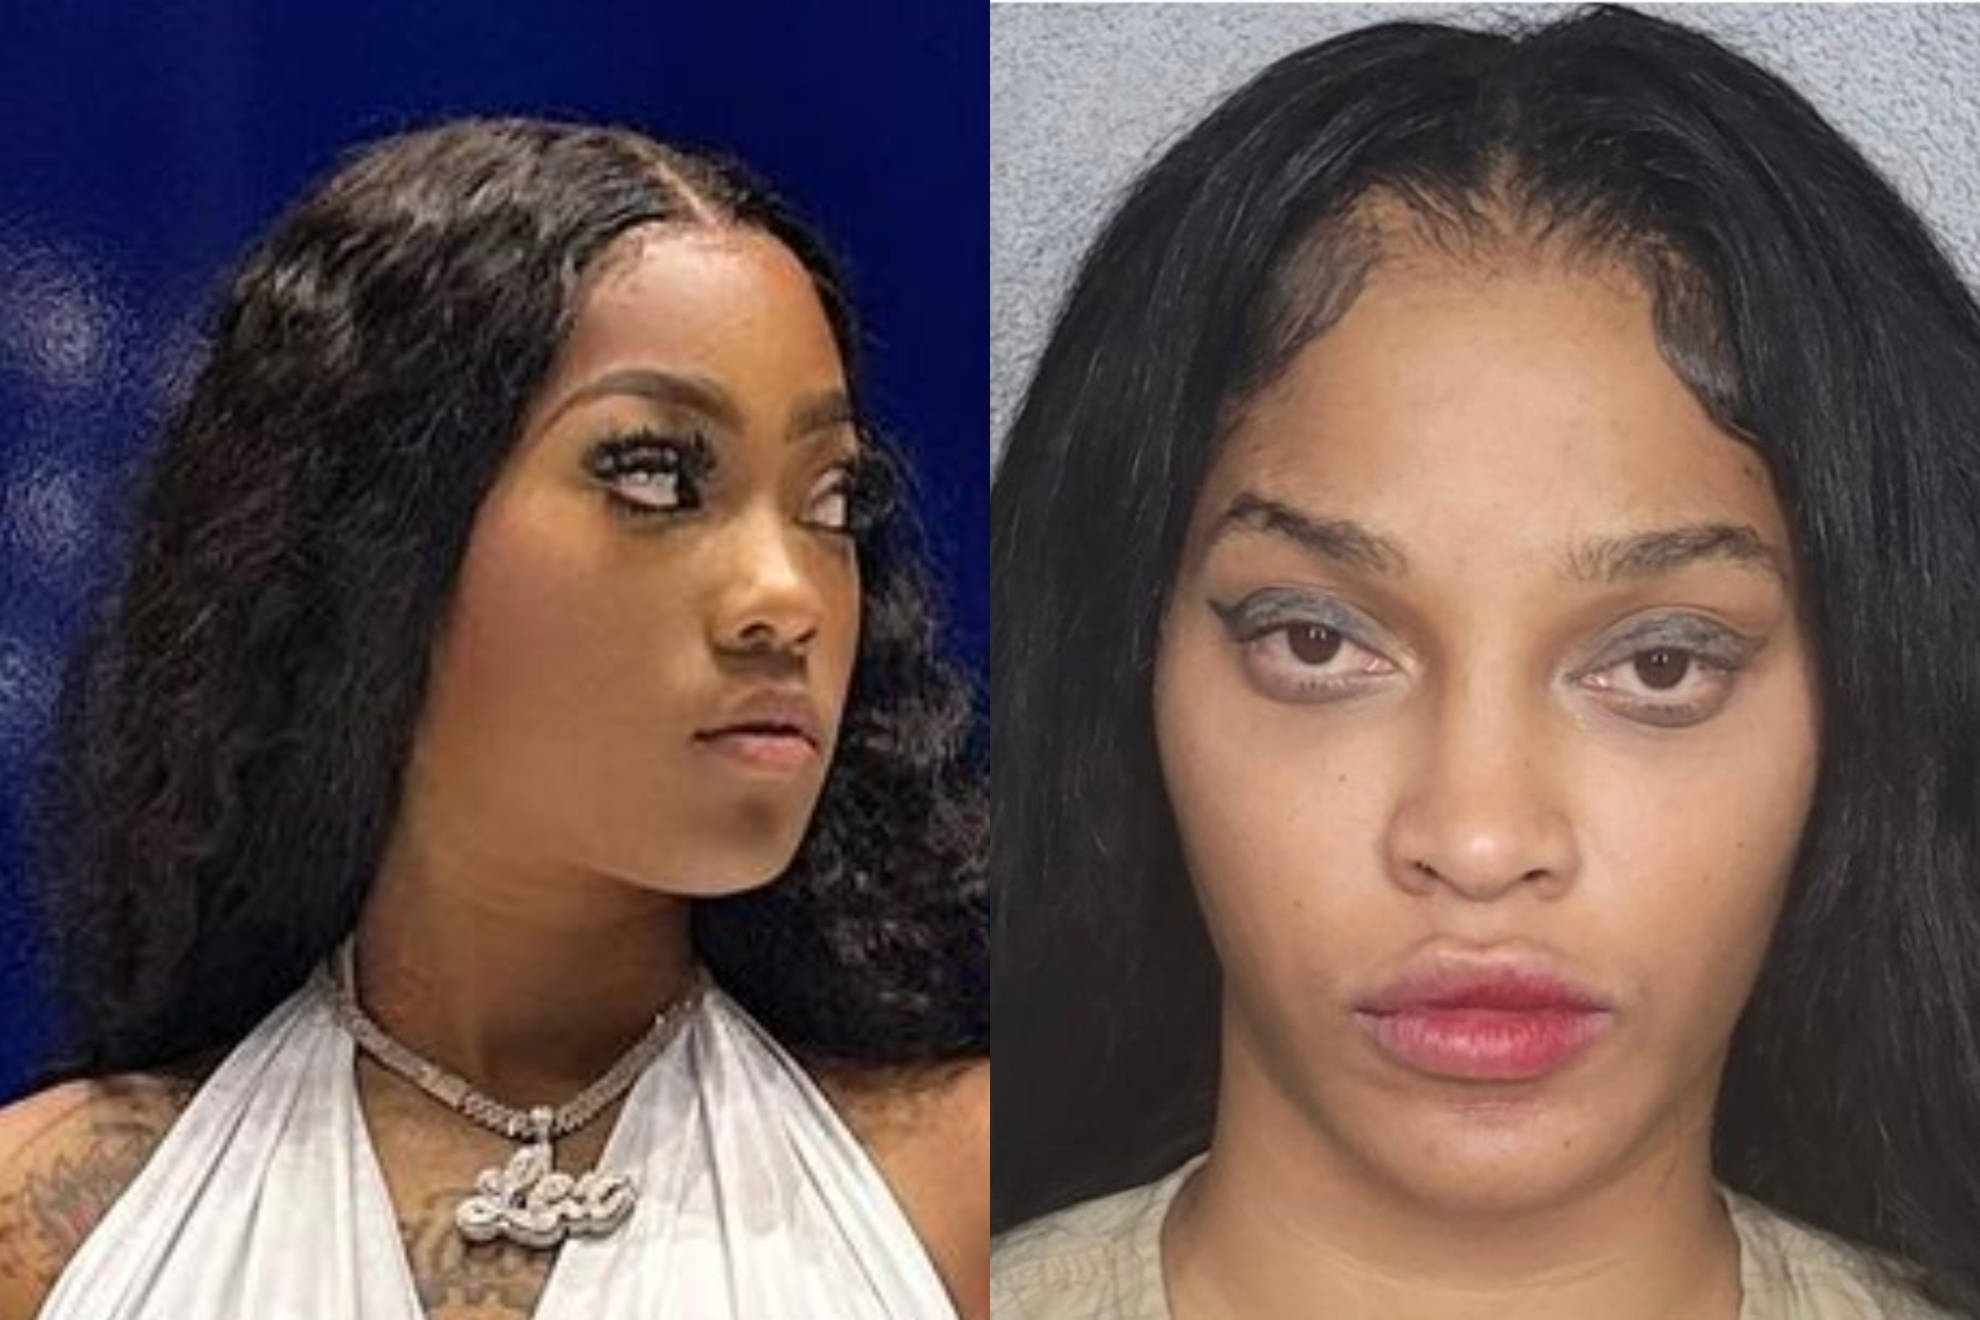 Joseline Hernandez arrested following vicious attack at Mayweather's exhibition fight